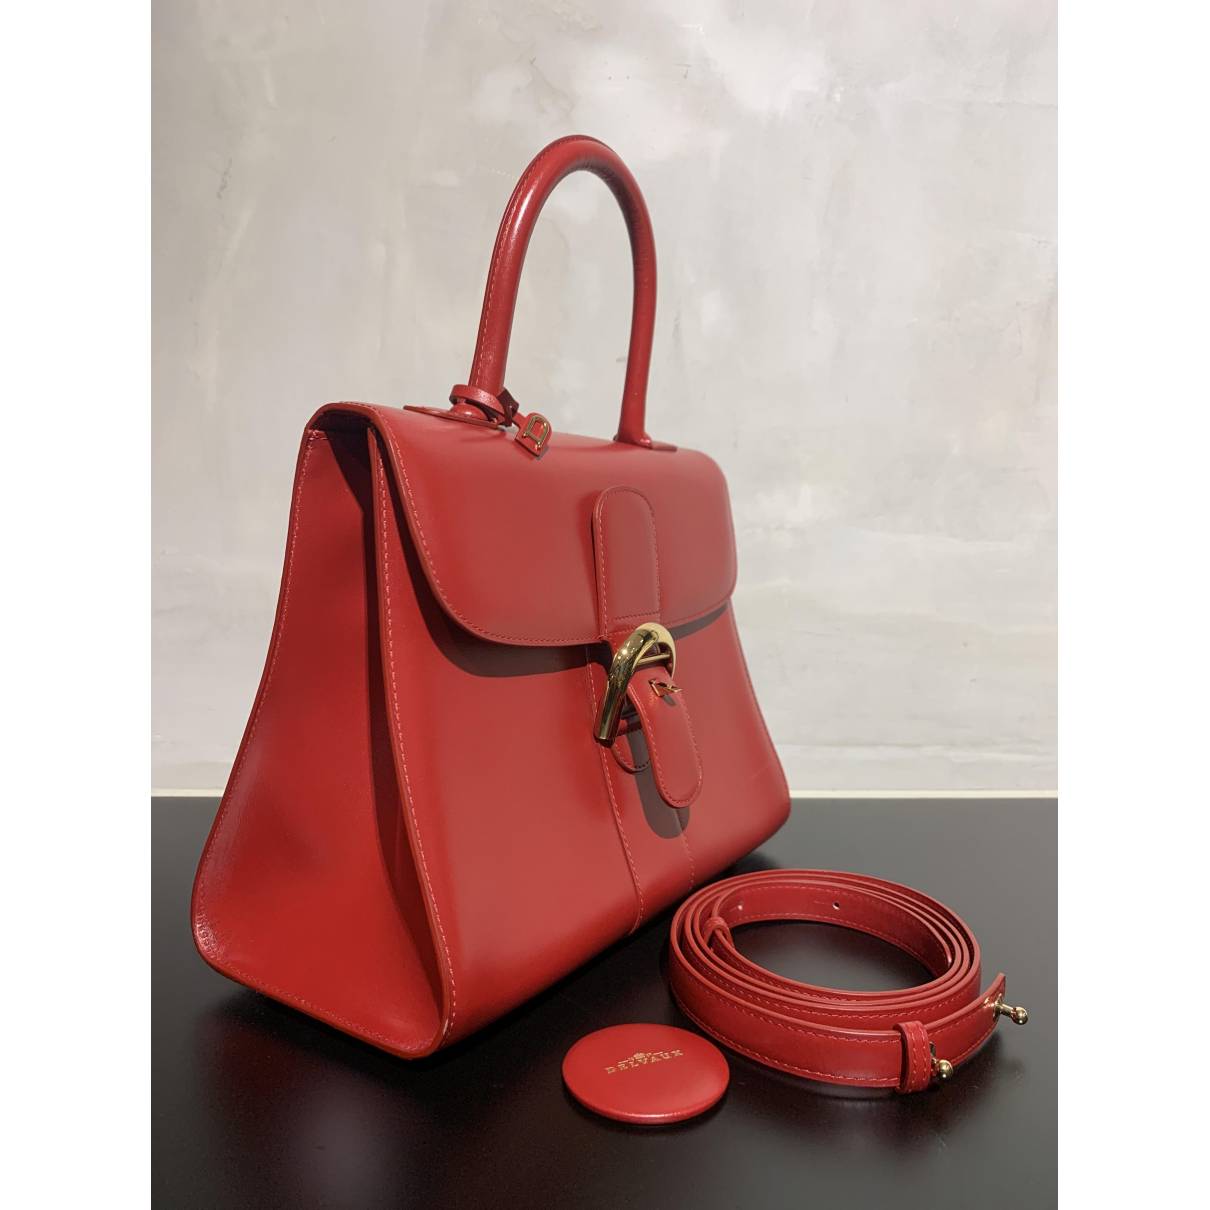 Delvaux - Authenticated Brillant Handbag - Leather Red Plain for Women, Very Good Condition